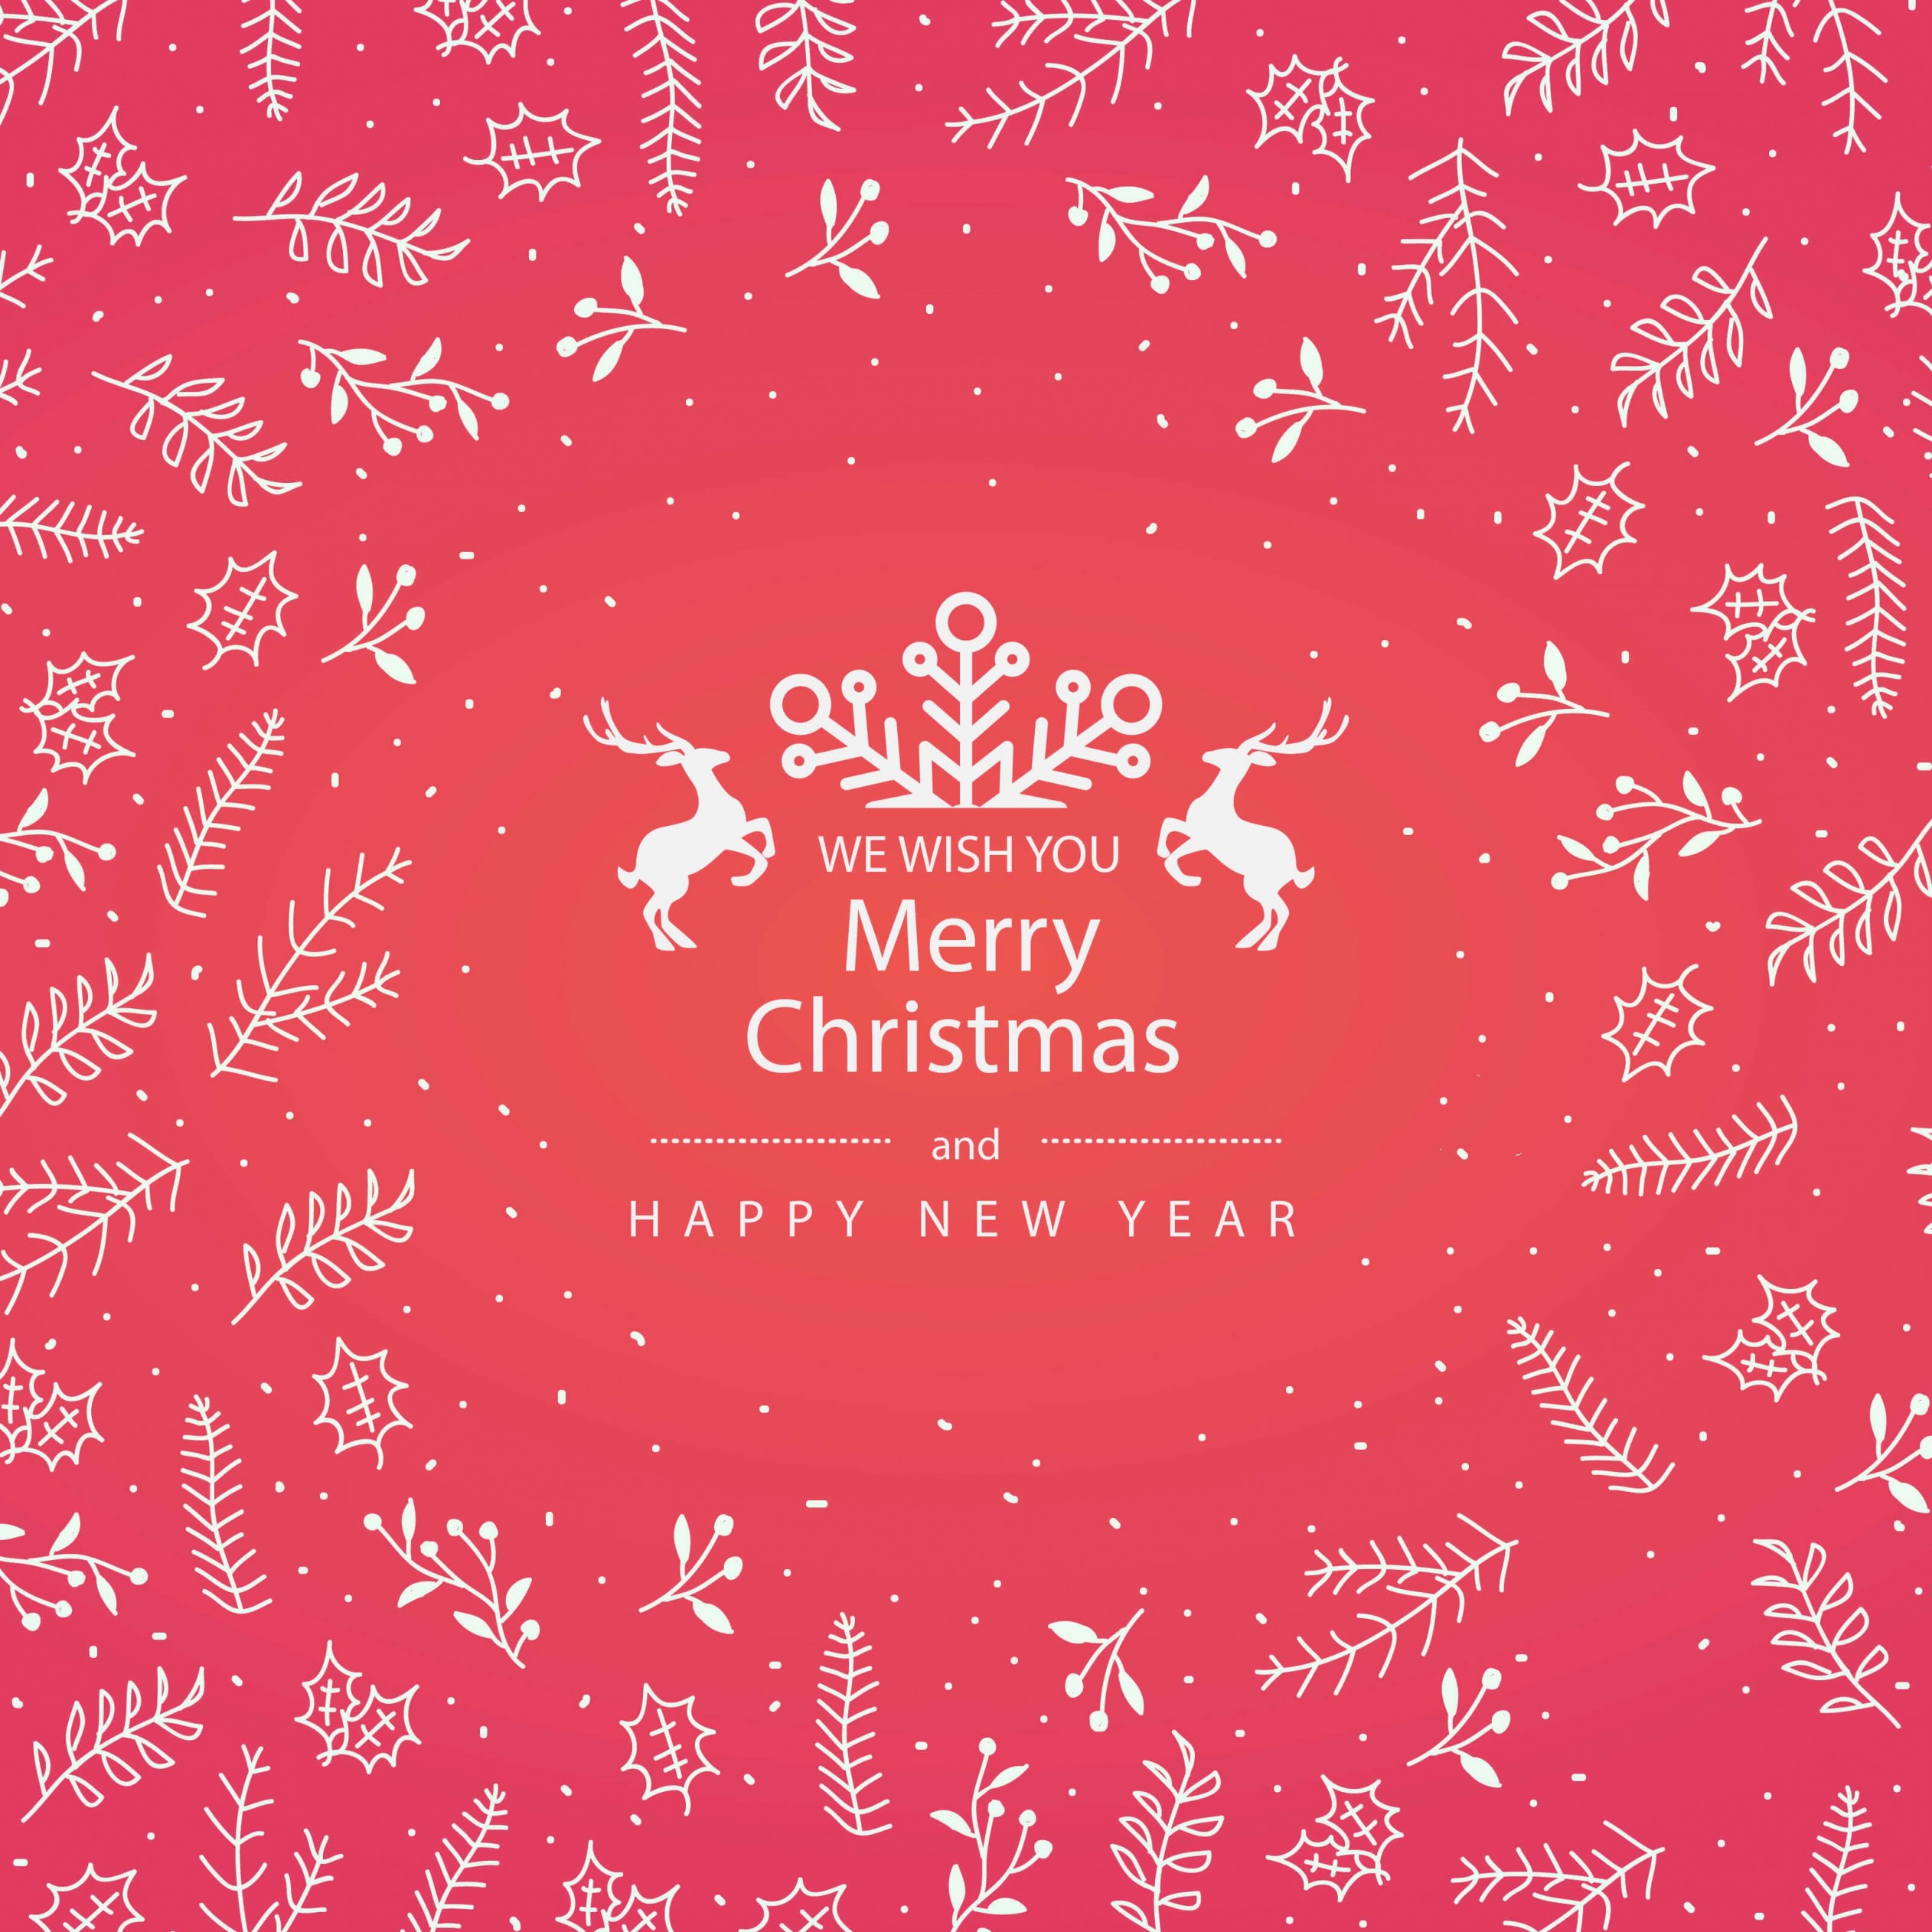 Merry Christmas Floral Wallpaper for Apple iPad mini 2